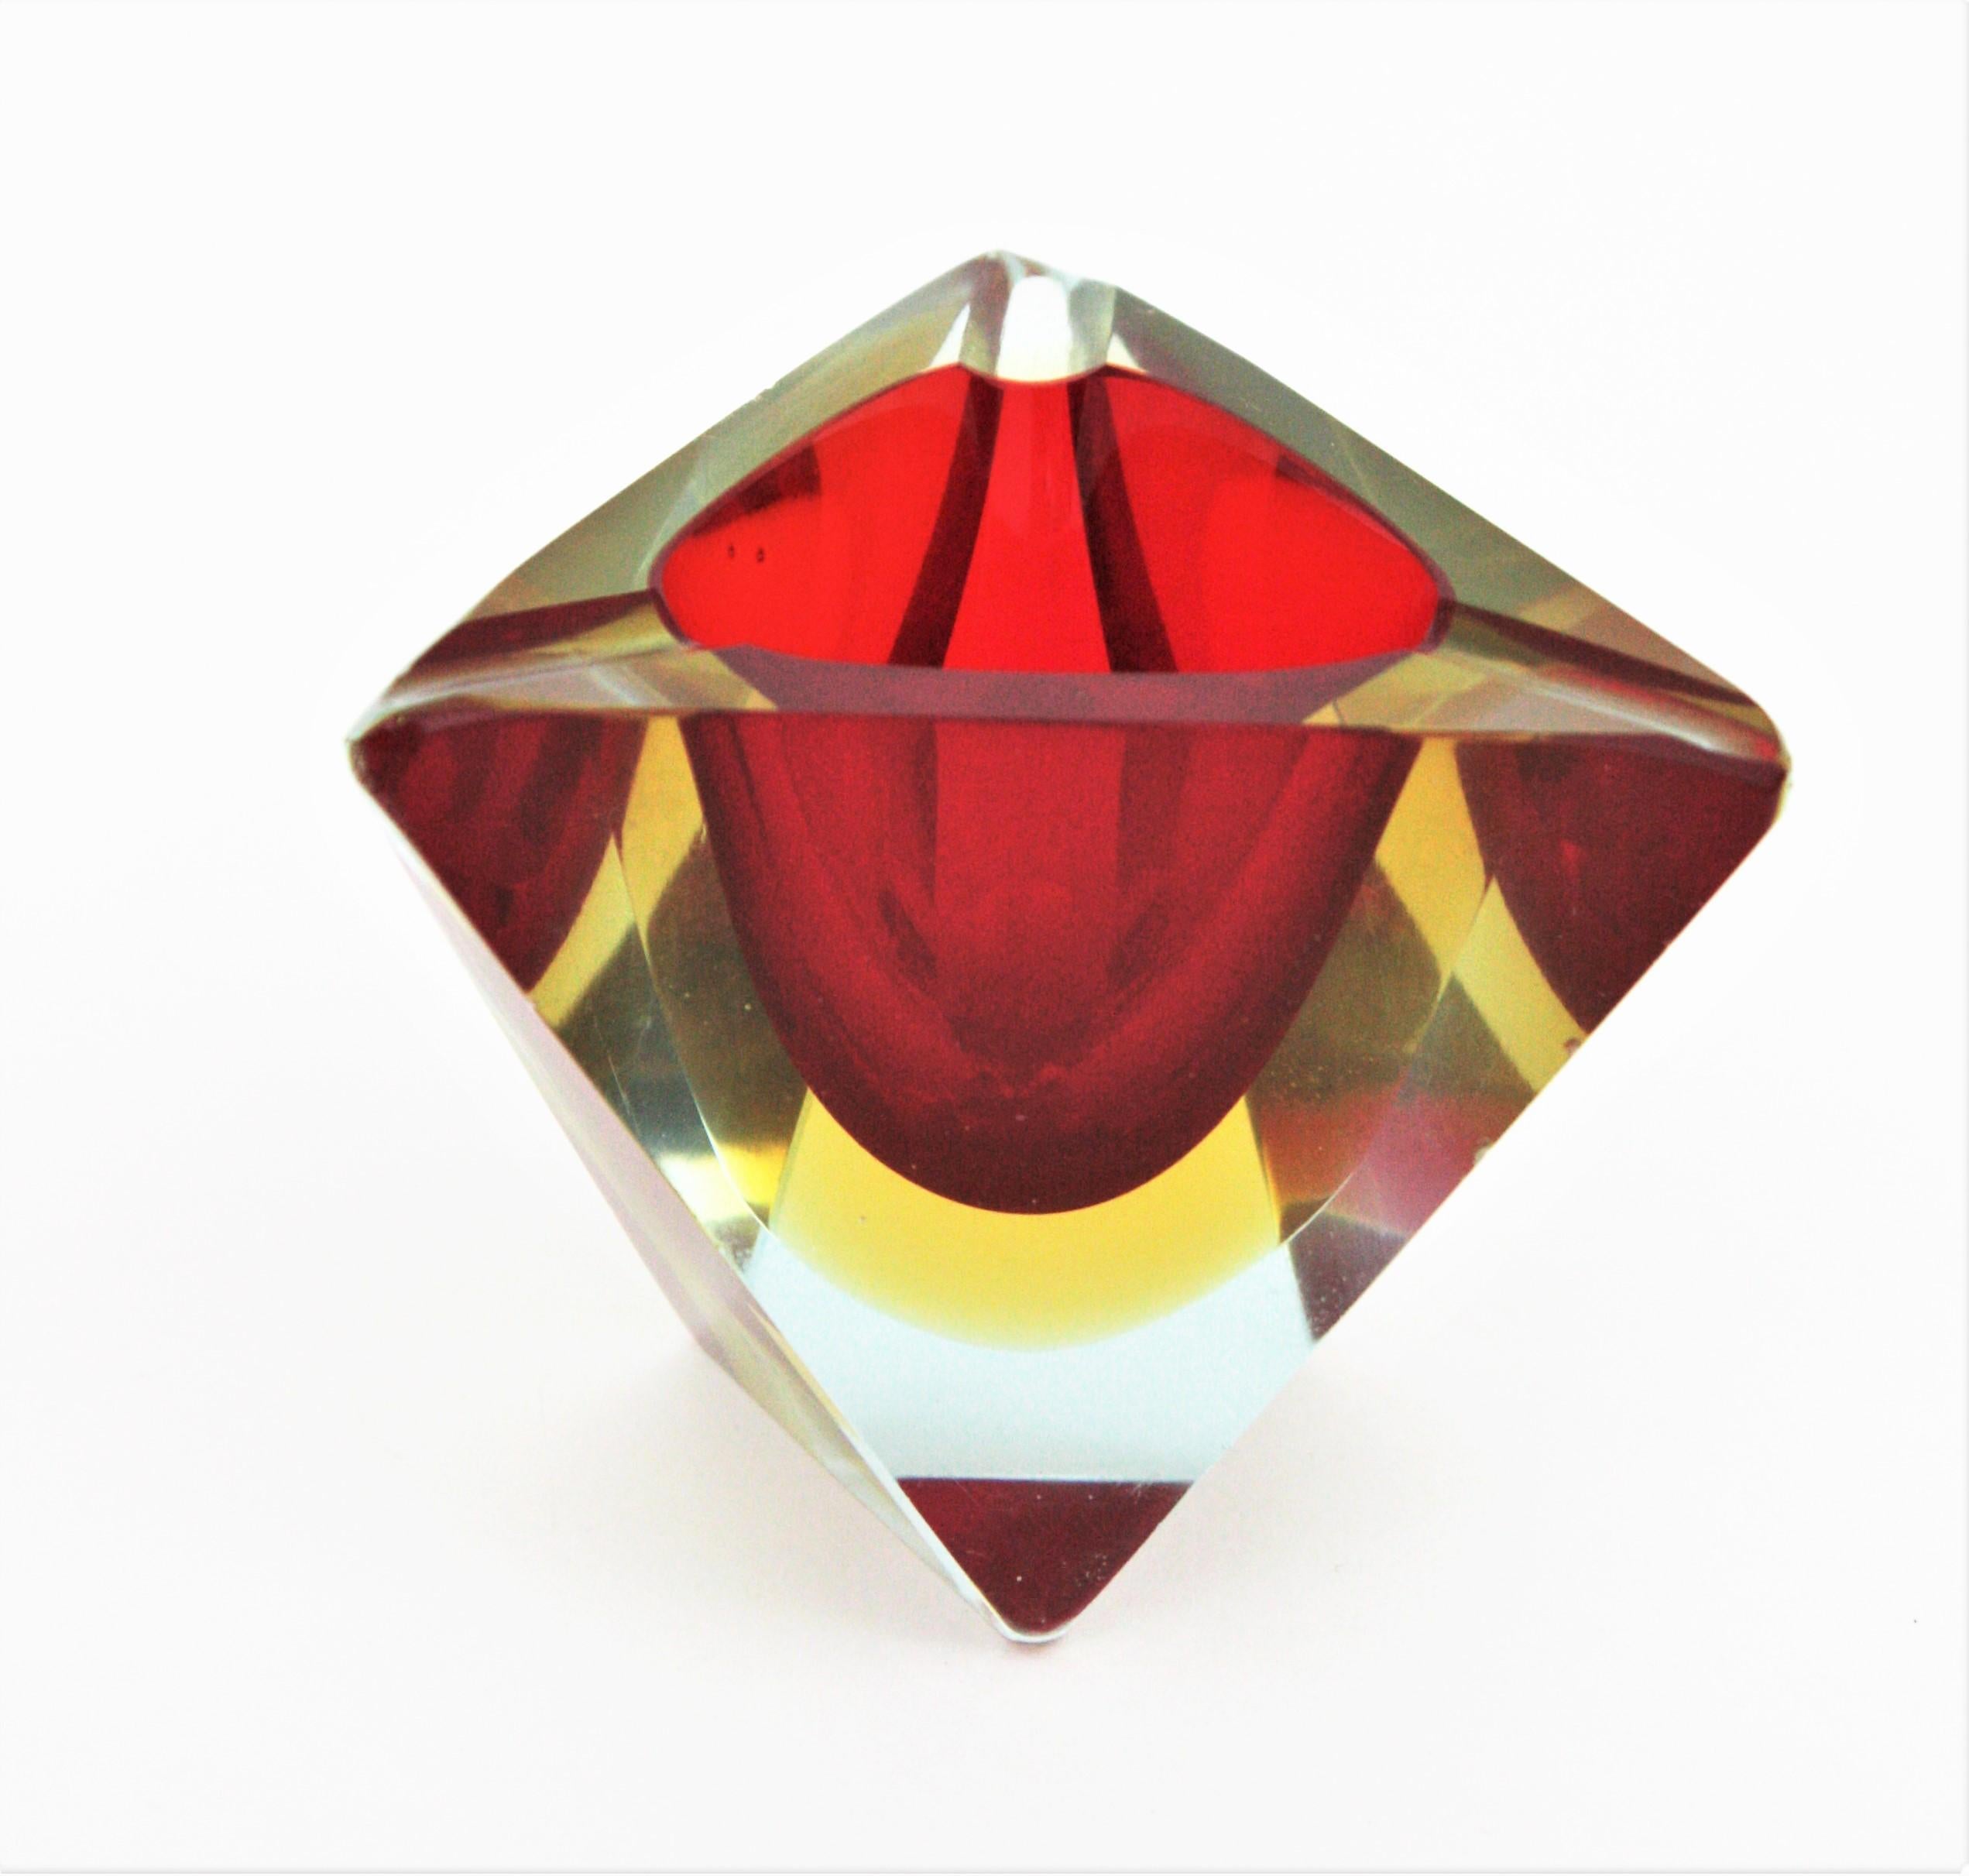 Sommerso faceted Murano glass triangular ashtray. Attributed to Flavio Poli, Italy, 1950s.
Red and yellow glass cased into clear glass.
It can be used also as small rings or jewelry bowl.
The matching Murano glass bowls shown at the images are